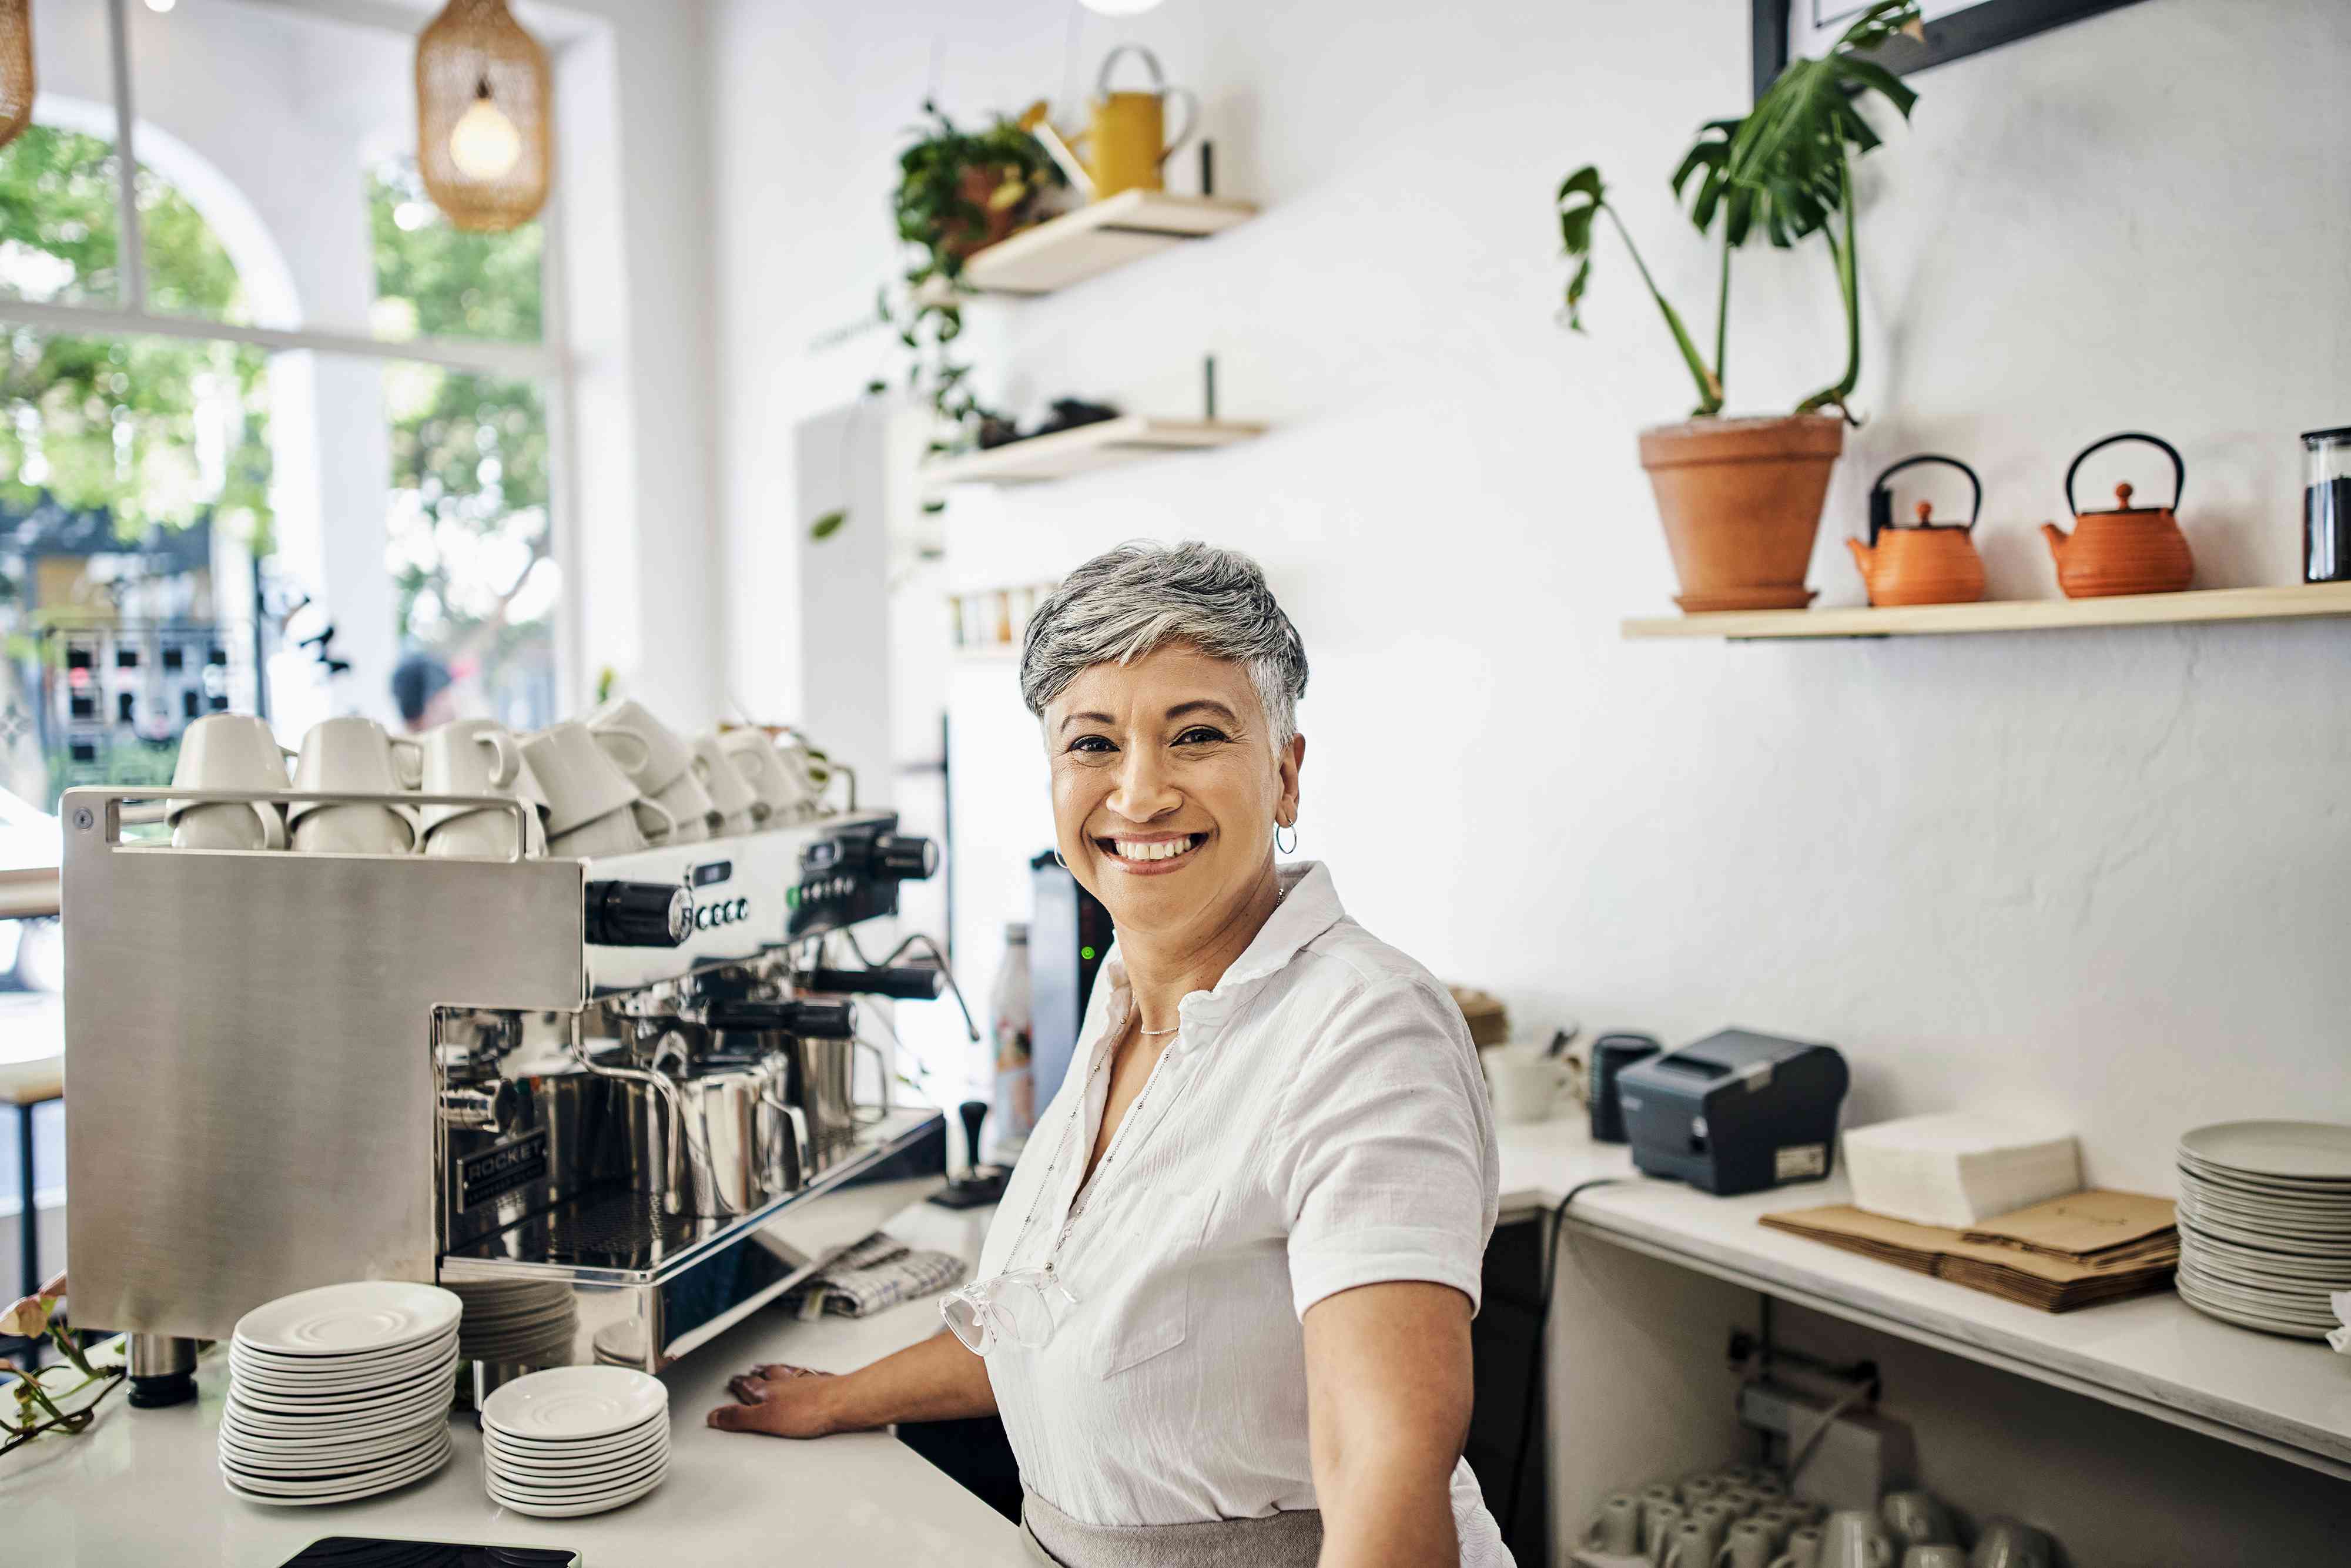 Coffee shop portrait of a woman or small business owner with startup success